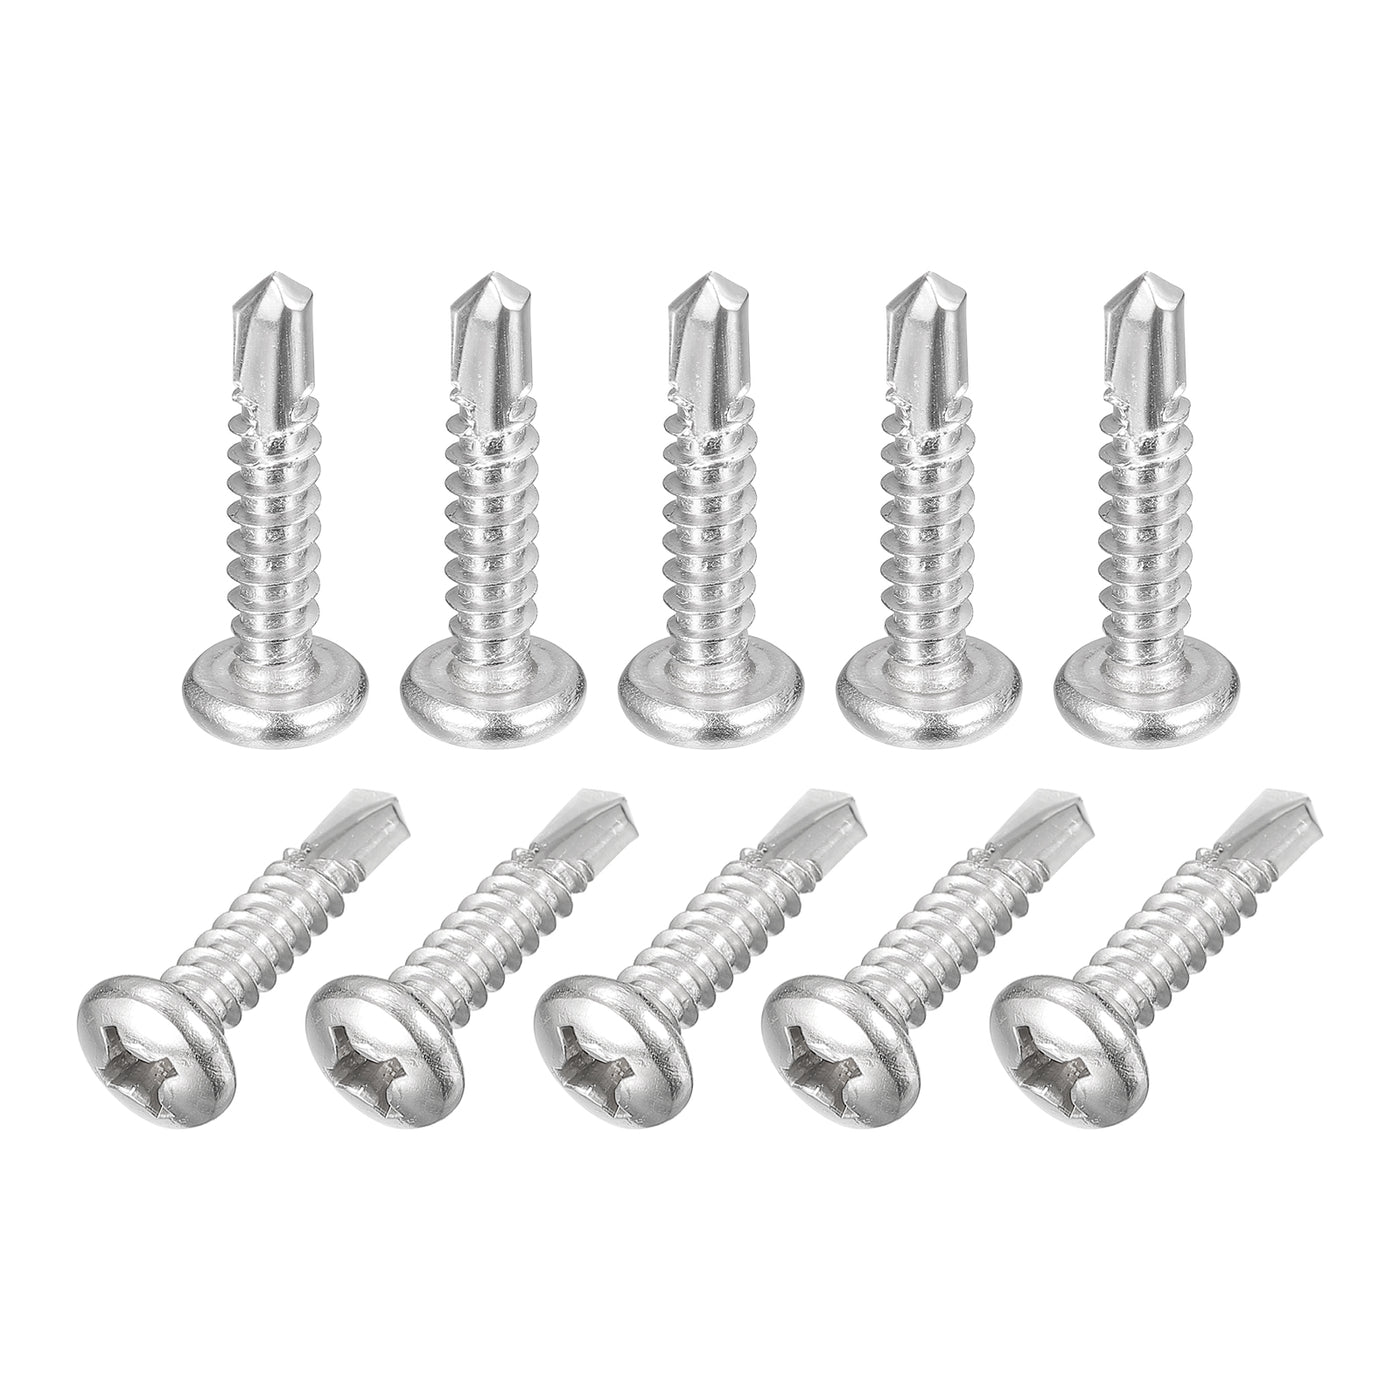 uxcell Uxcell #12 x 1" Self Drilling Screws, 10pcs Phillips Pan Head Self Tapping Screws